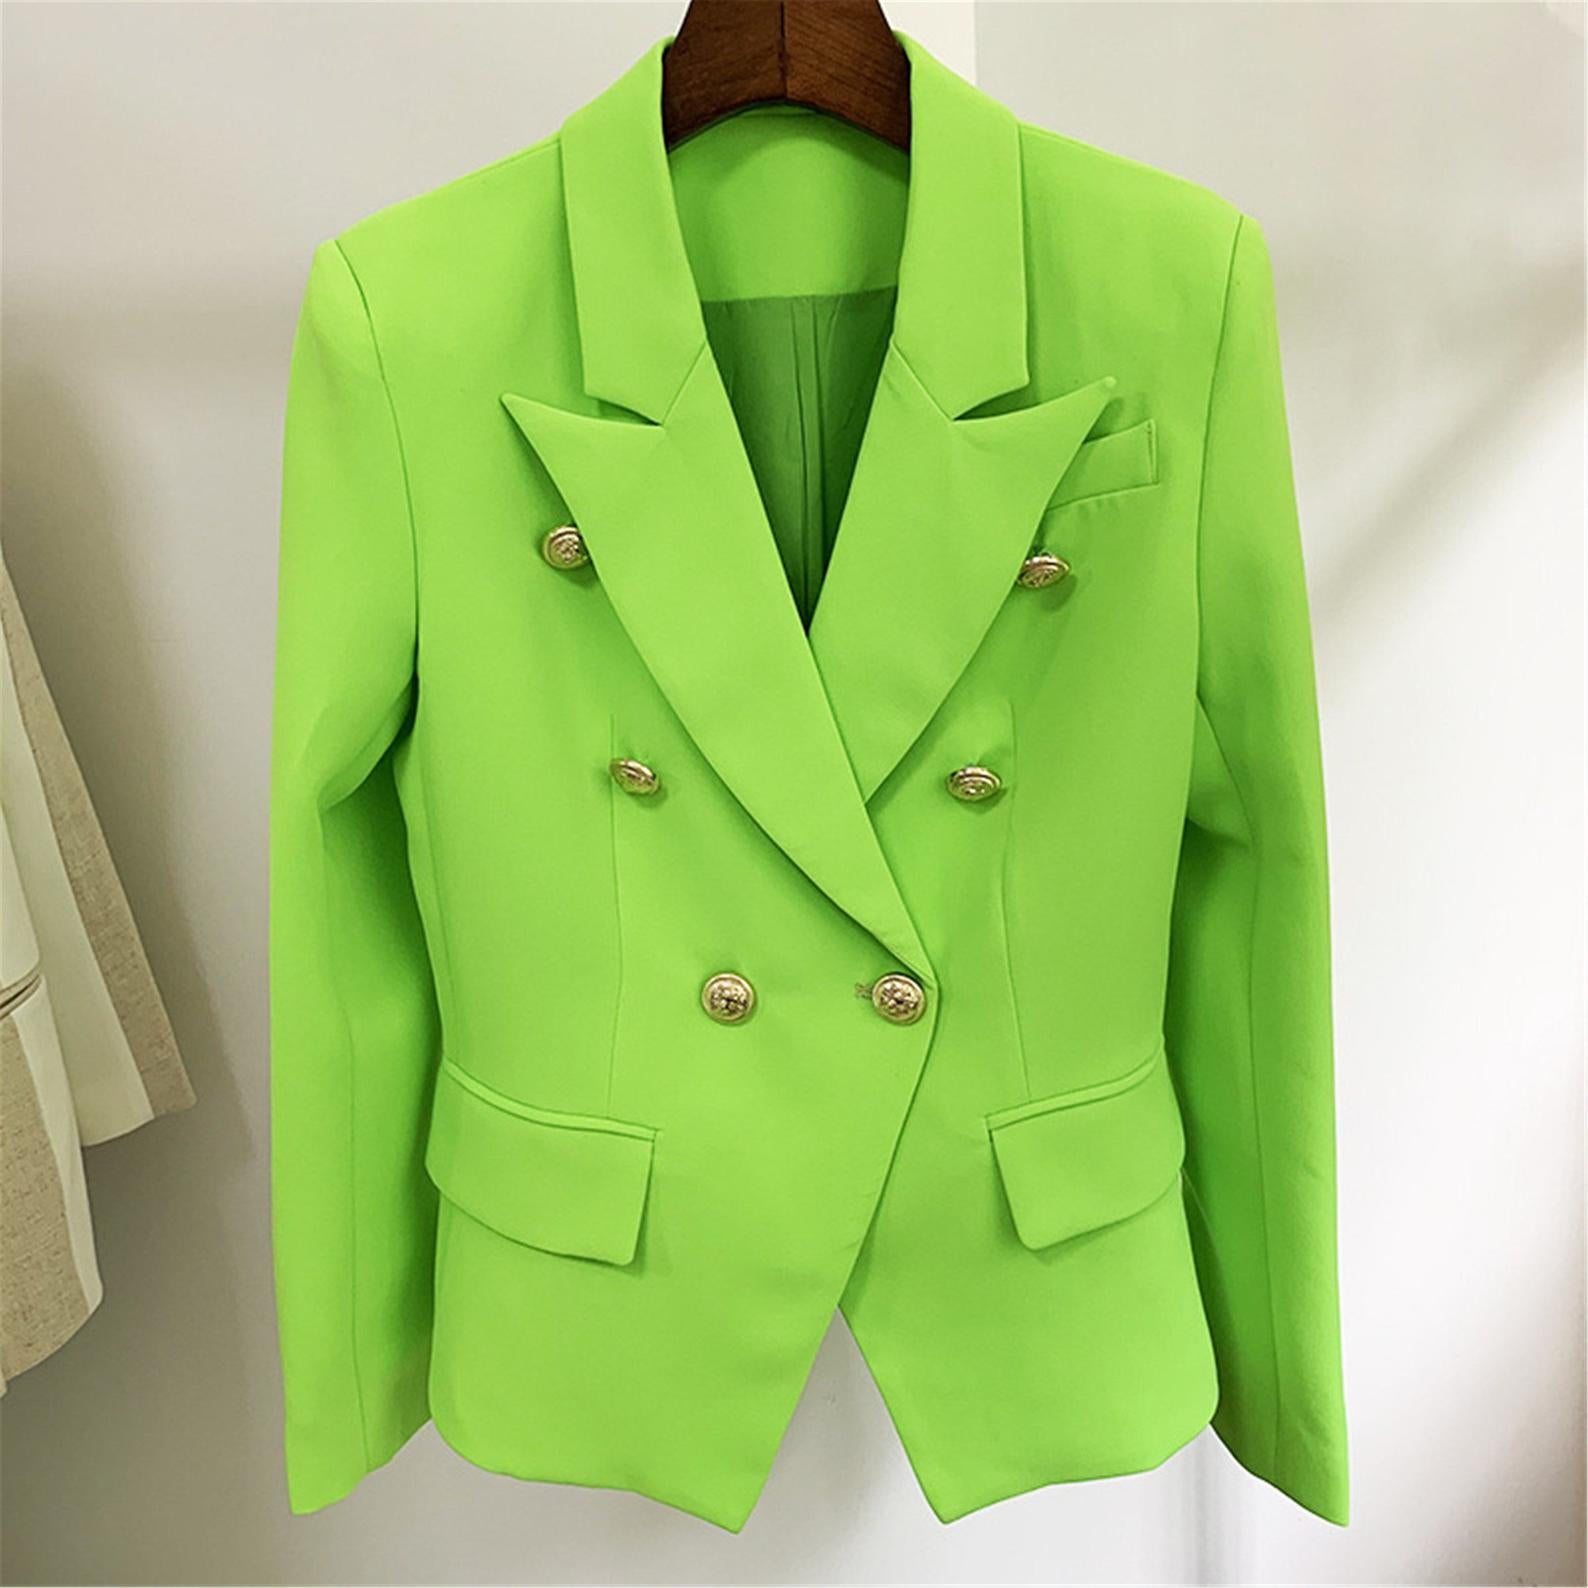 Women's Blazer Golden Lion Buttons Coat Neon Green  UK CUSTOMER SERVICE! Women's Blazer Golden Lion Buttons Coat Neon Green, can worn for interview , college inauguration, ceremony, official sites. Decorative buttons at the cuffs, and Lined. Size: UK 4-14/ EU 32-42/ US 0-10